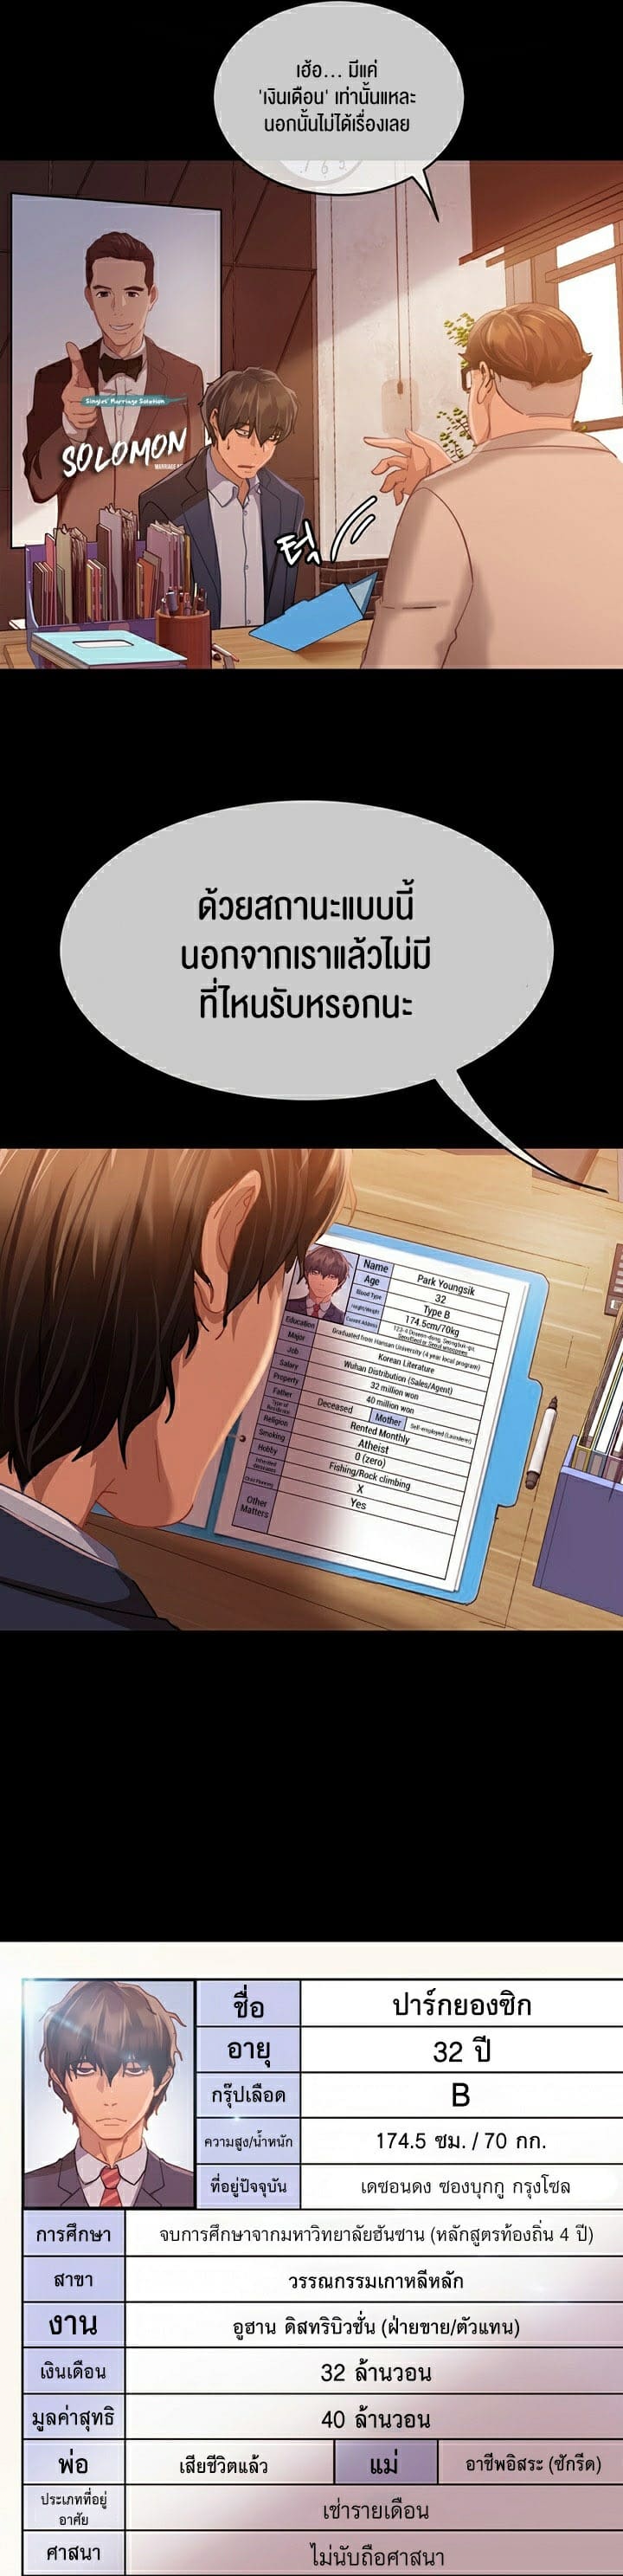 Marriage Agency Review ตอนที่ 1 ภาพ 5